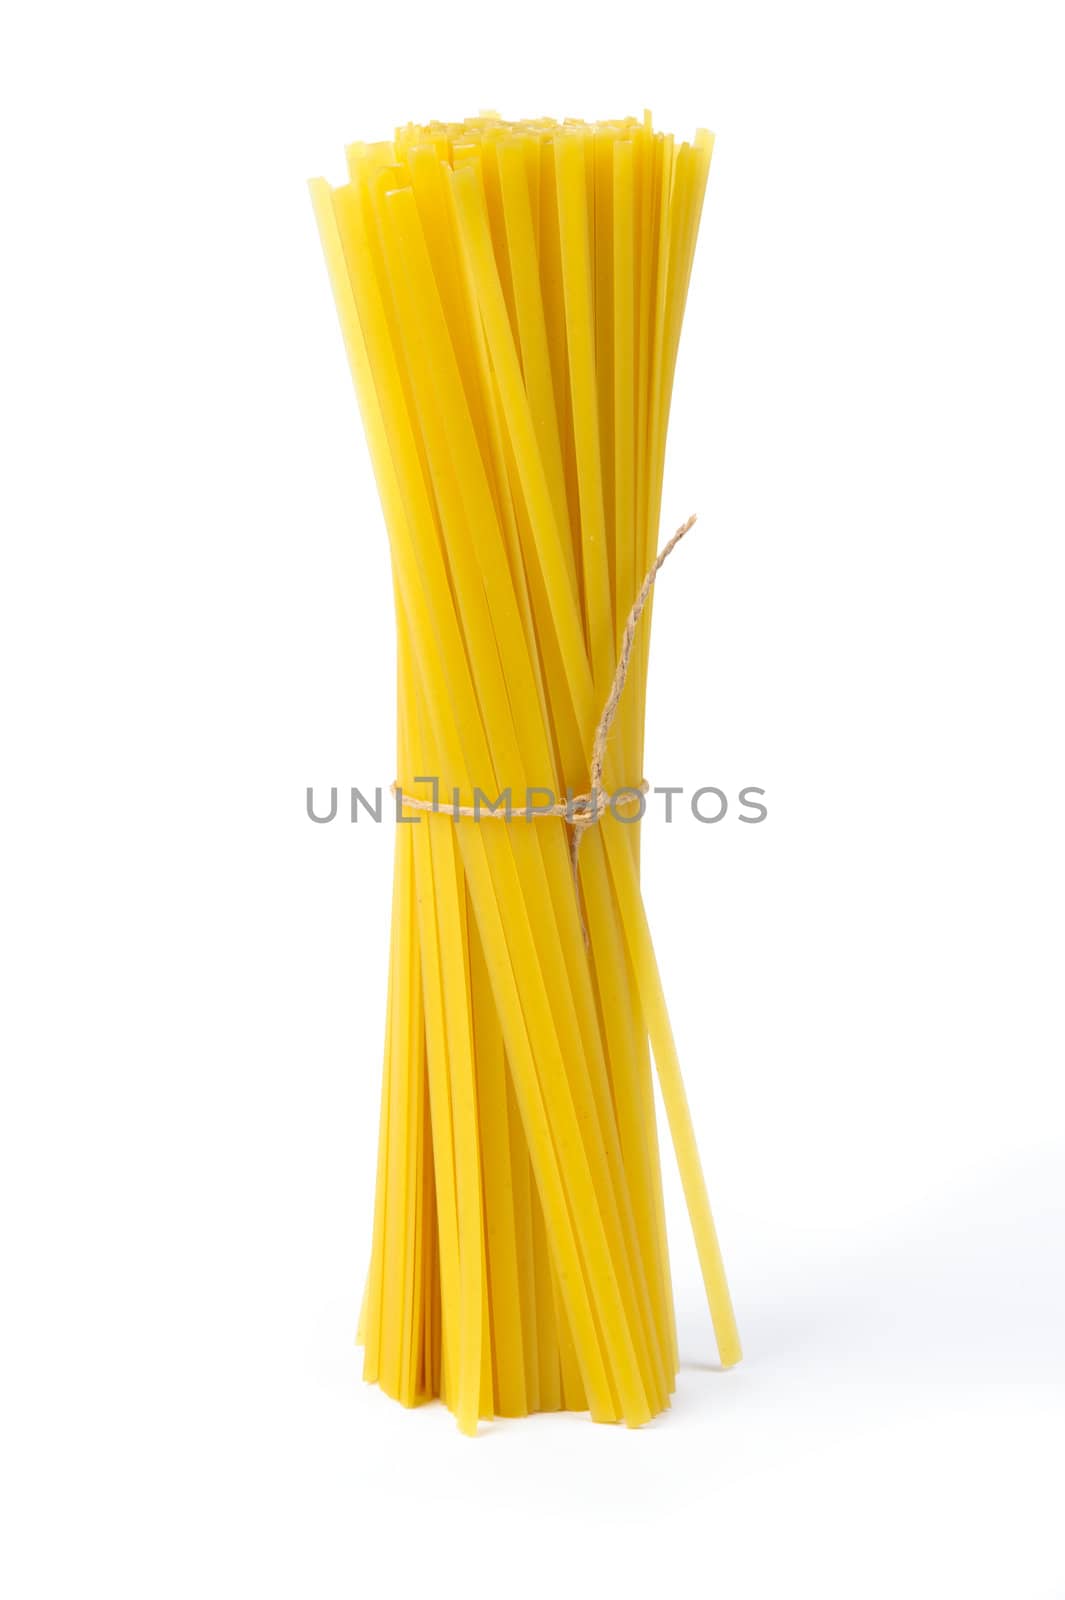 An image of raw yellow pasta on white background